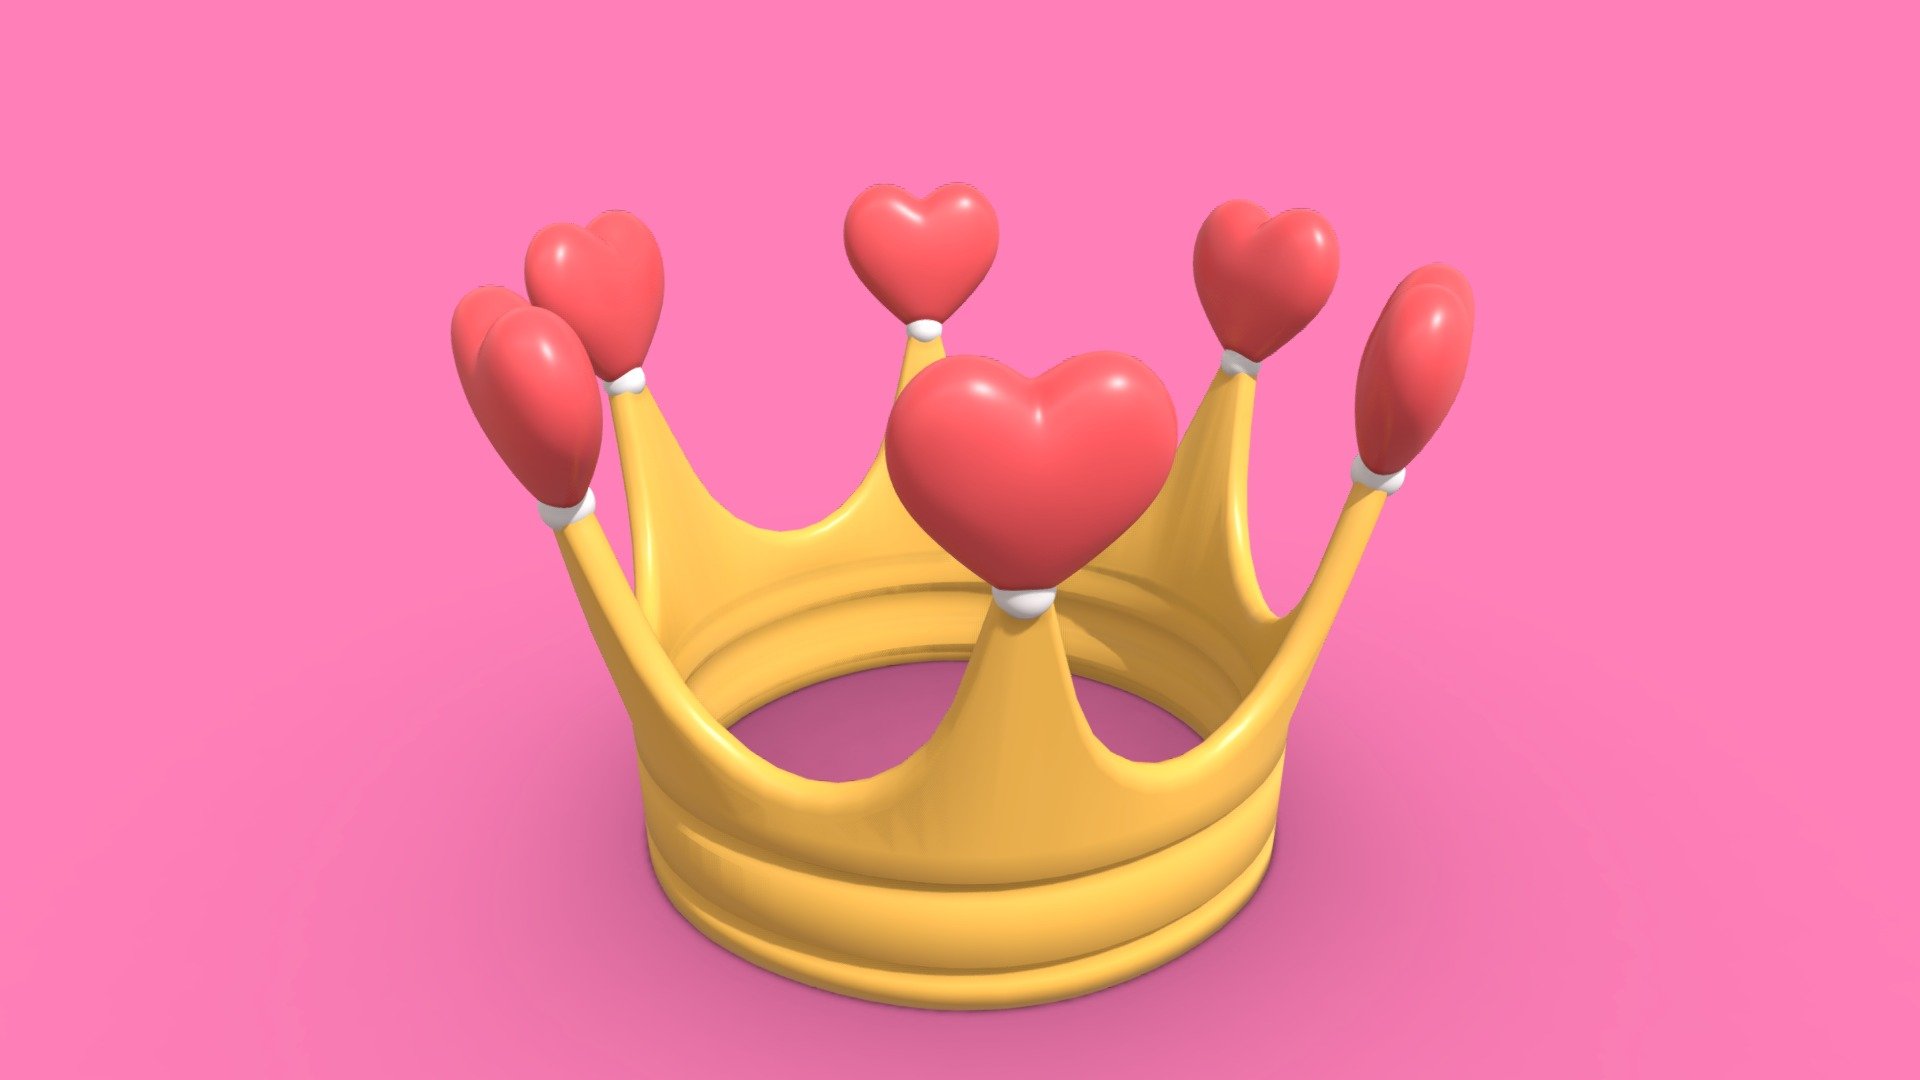 This cute and simple crown is oredered by someone before and when it's done they want to scrap it and make a new one from scratch, So i decided to share this 3D model cause they not using it 3d model